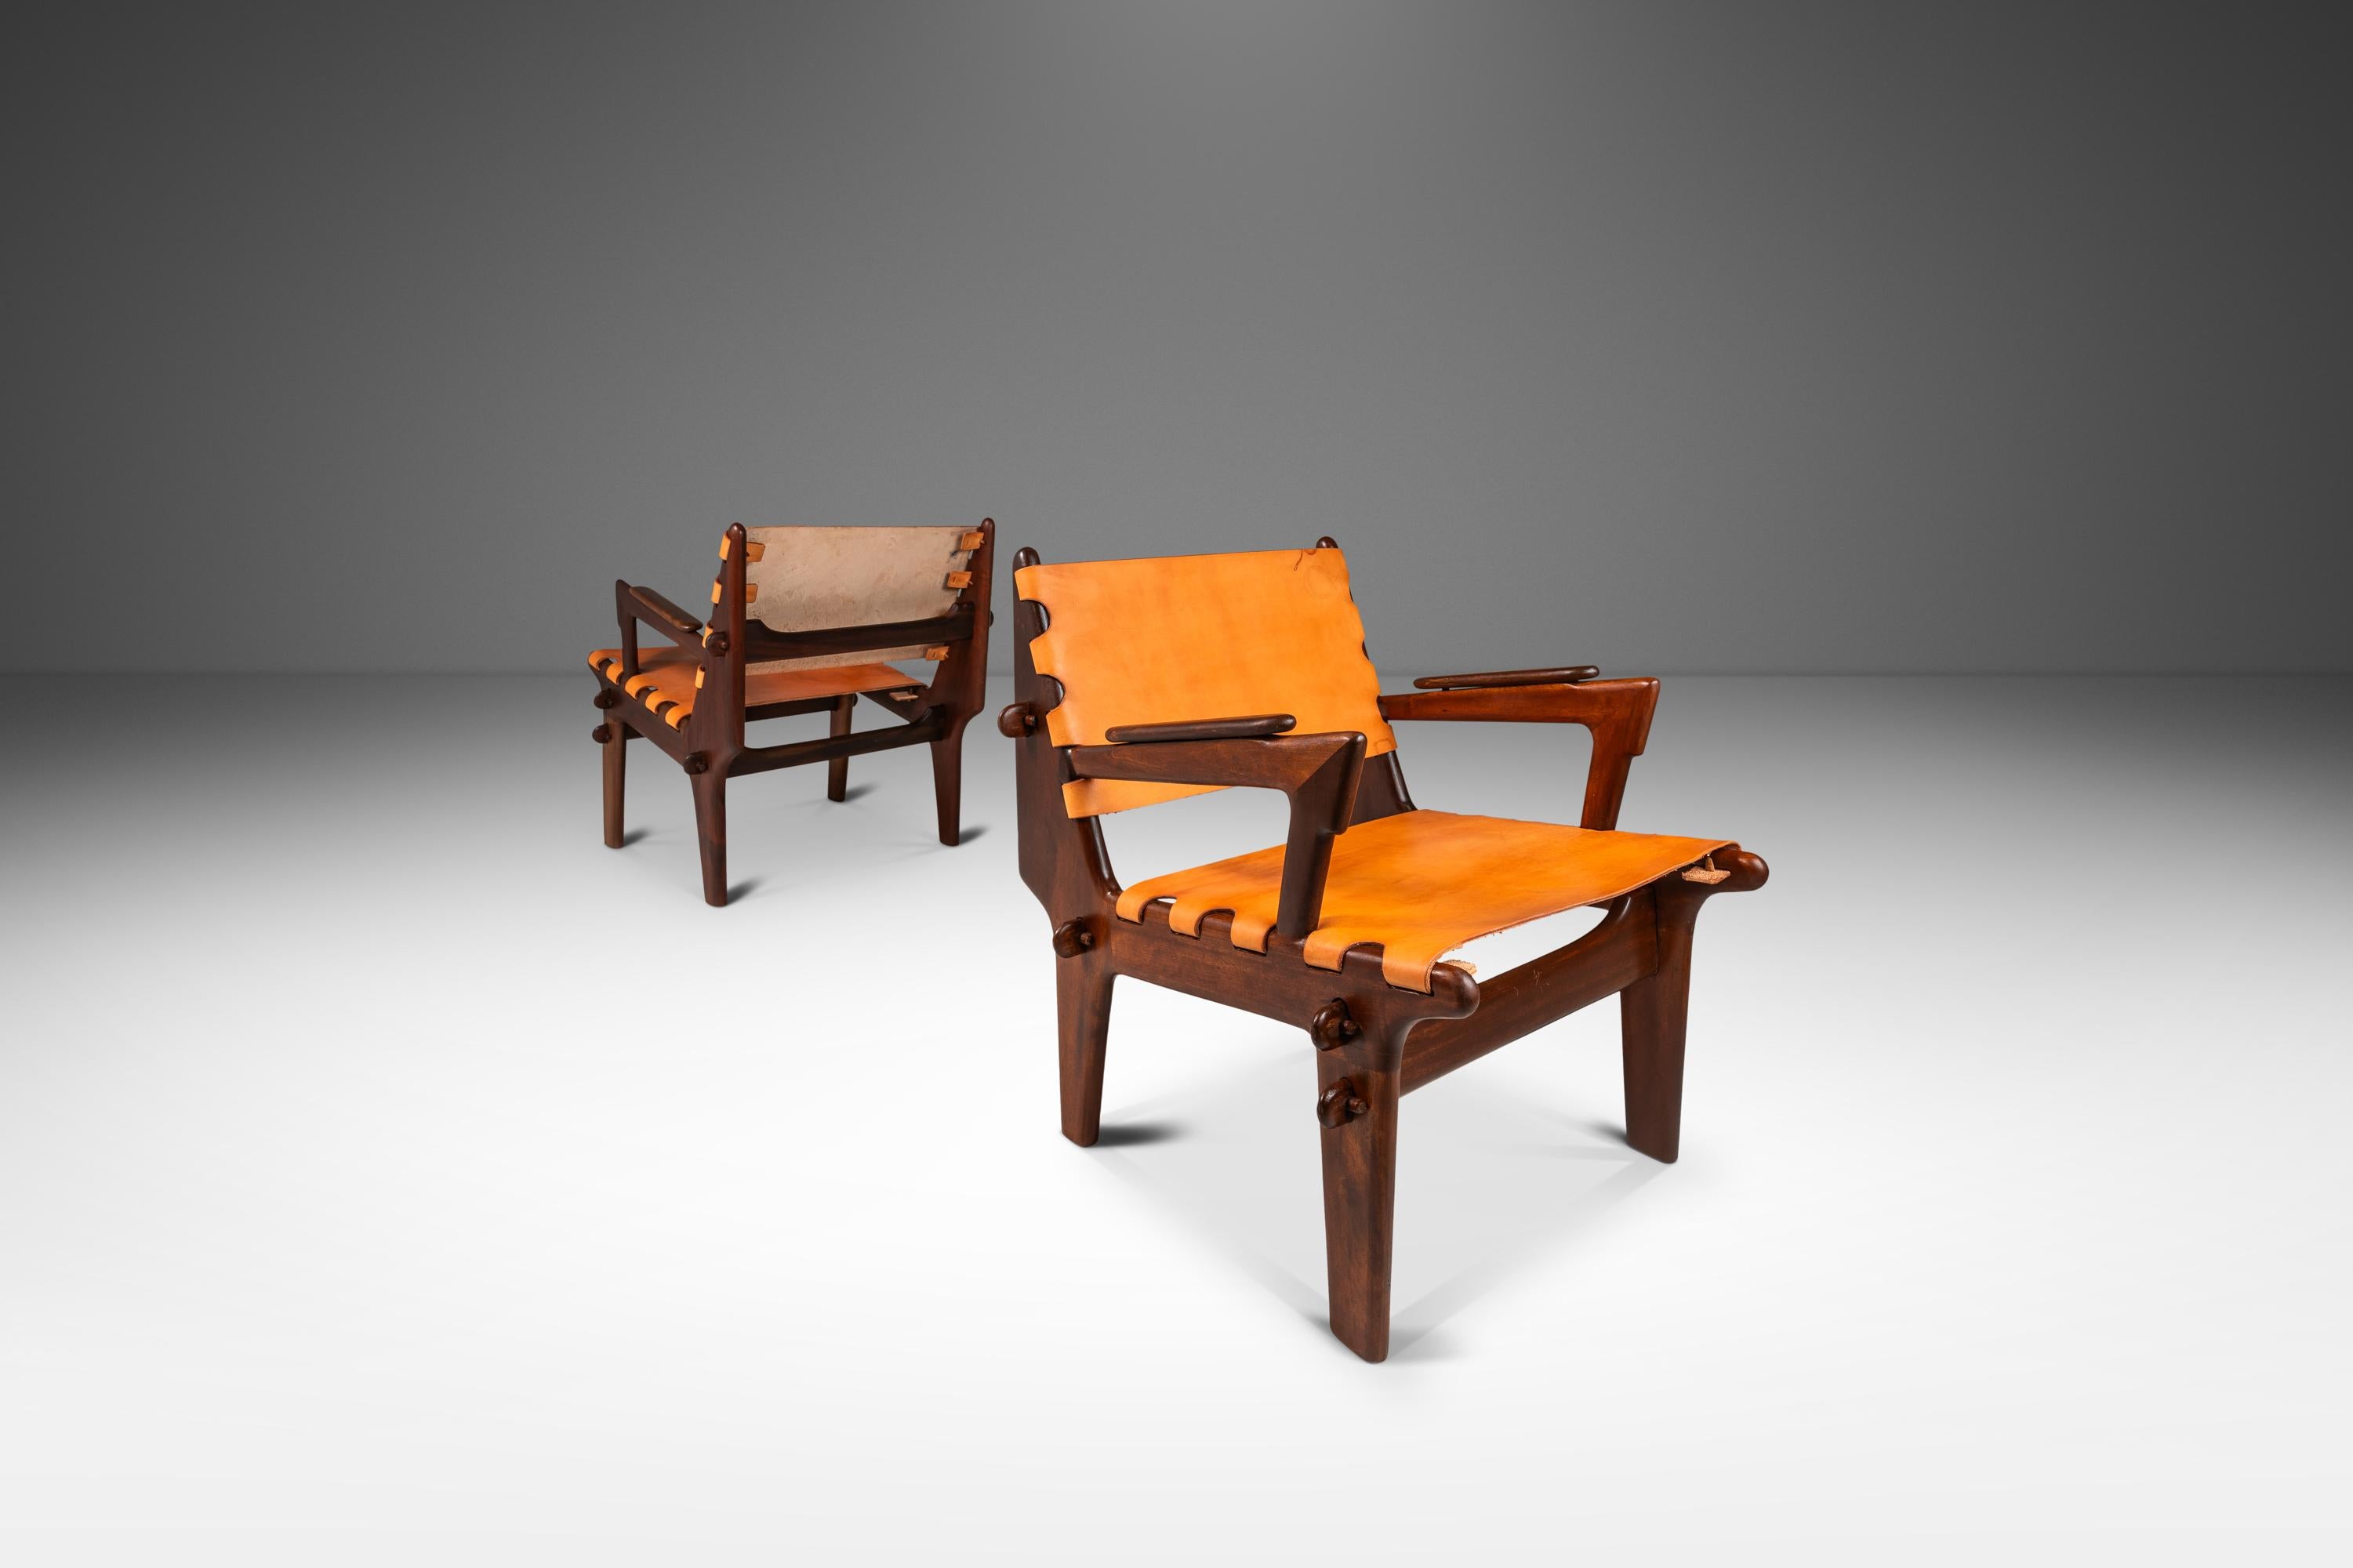 Set of 2 Tooled Leather Sling Lounge Chairs by Angel Pazmi, Ecuador, c. 1960's For Sale 2